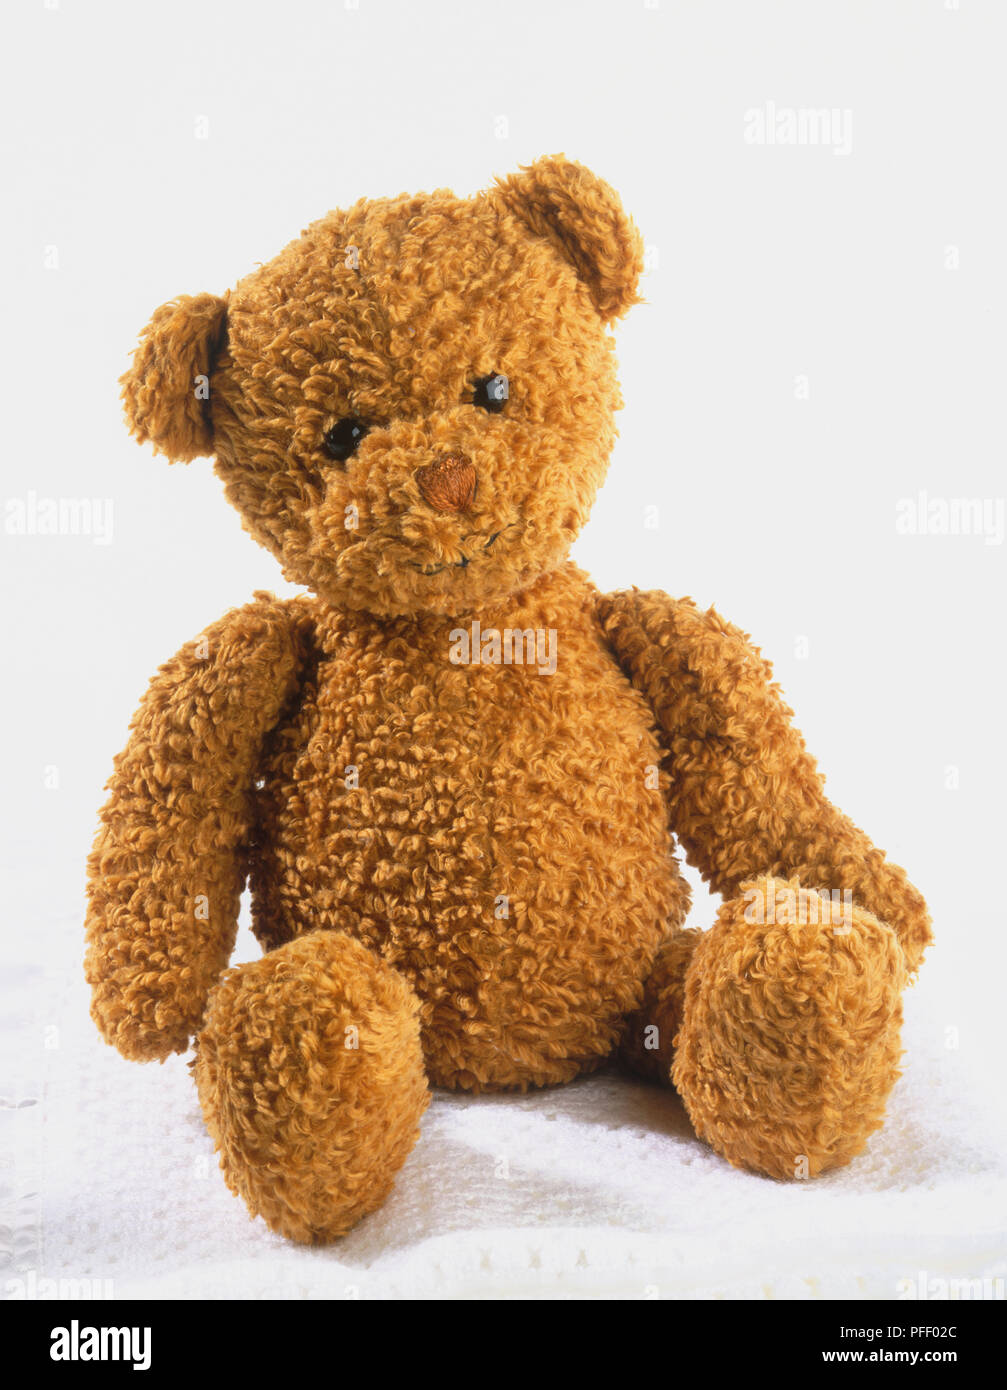 Brown teddy bear sitting on top of folded white blanket Stock Photo